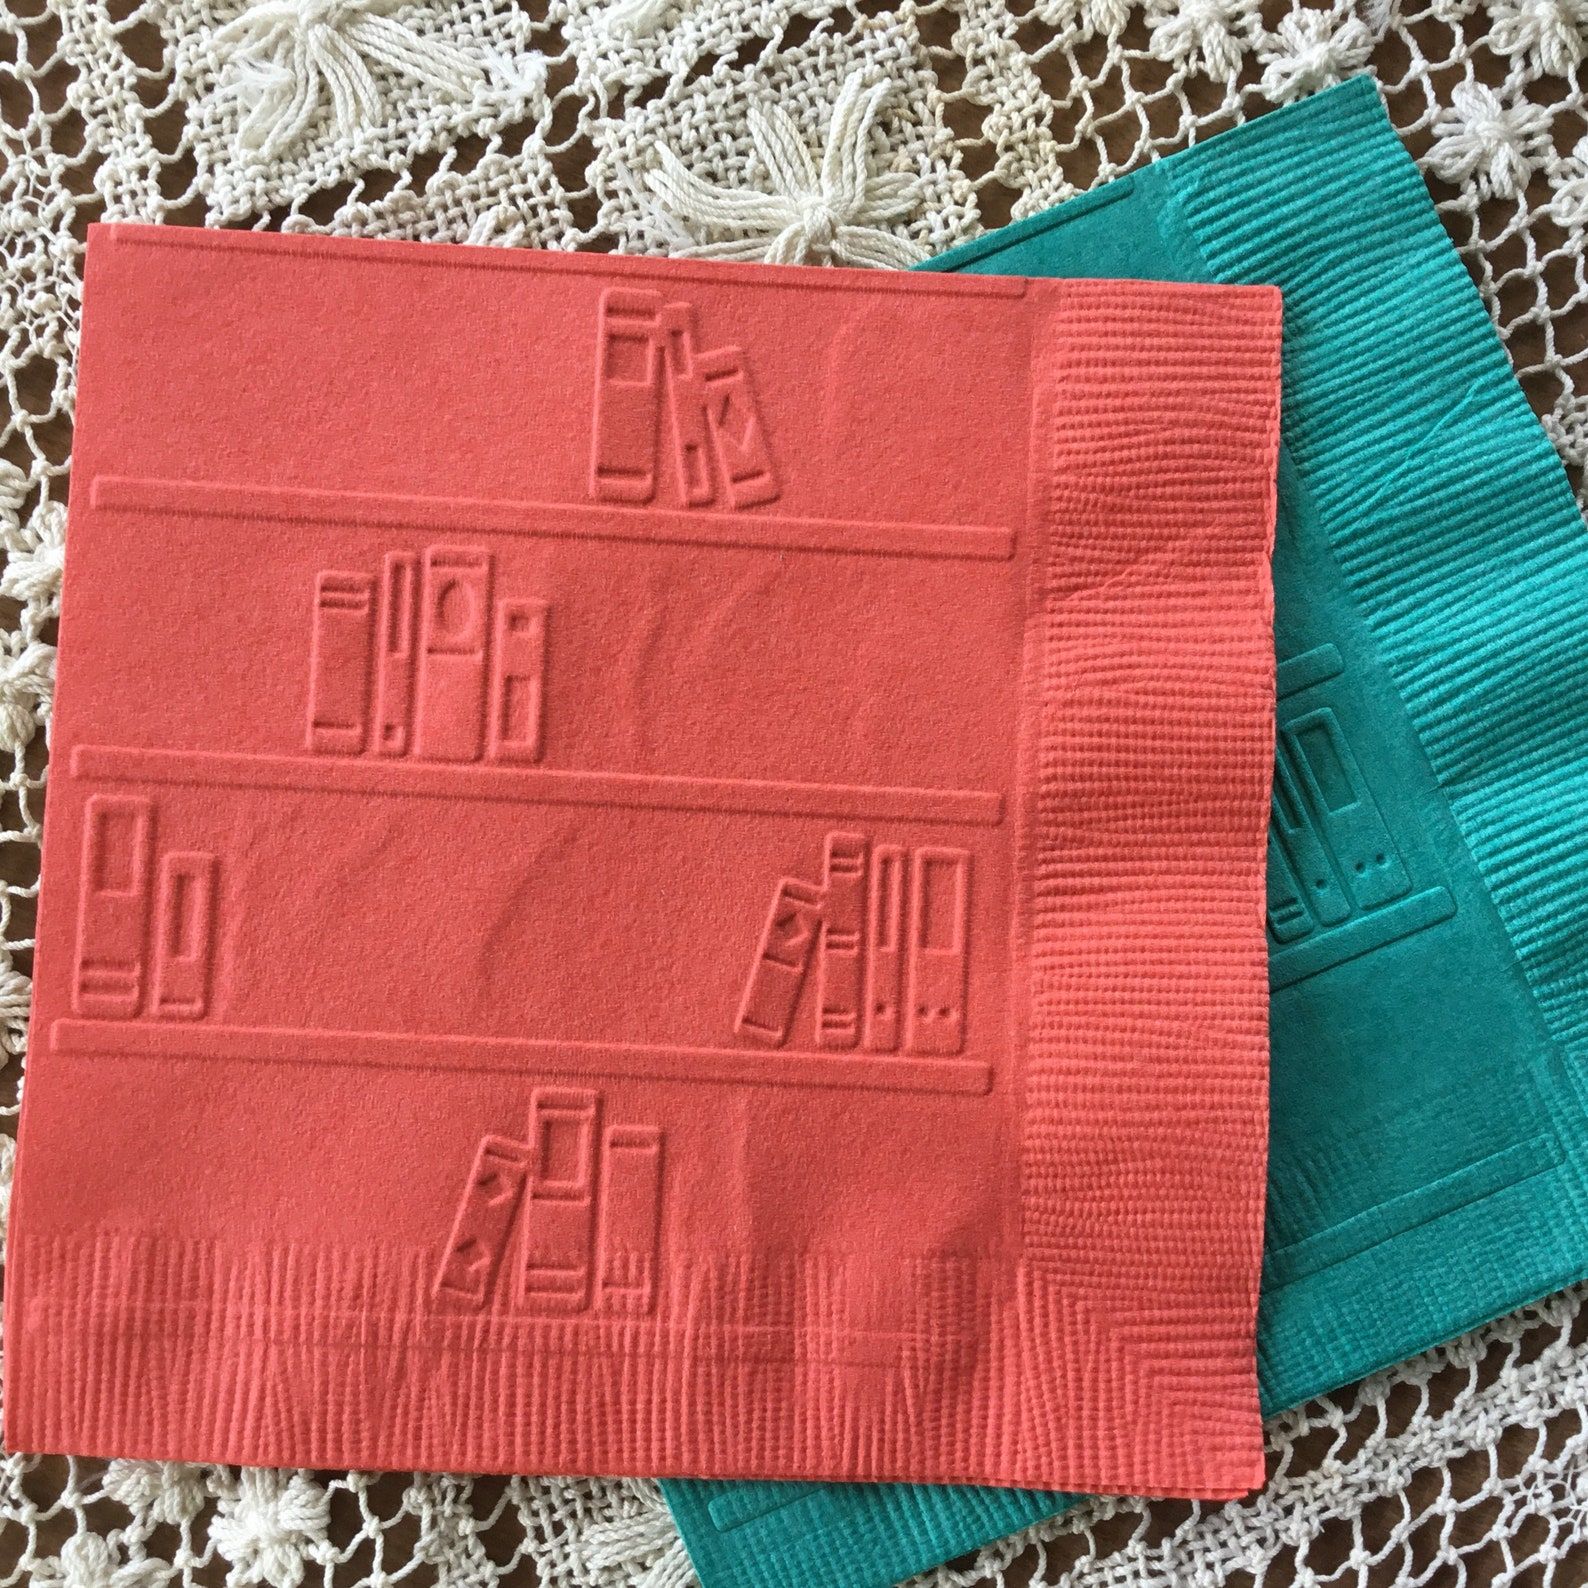 A red napkin and a teal napkin lie on top of a white doily. The napkins are the disposable paper ones with a graphic of a bookshelf embossed in. There are four levels of the bookshelf with different numbers of books on the respective shelves.